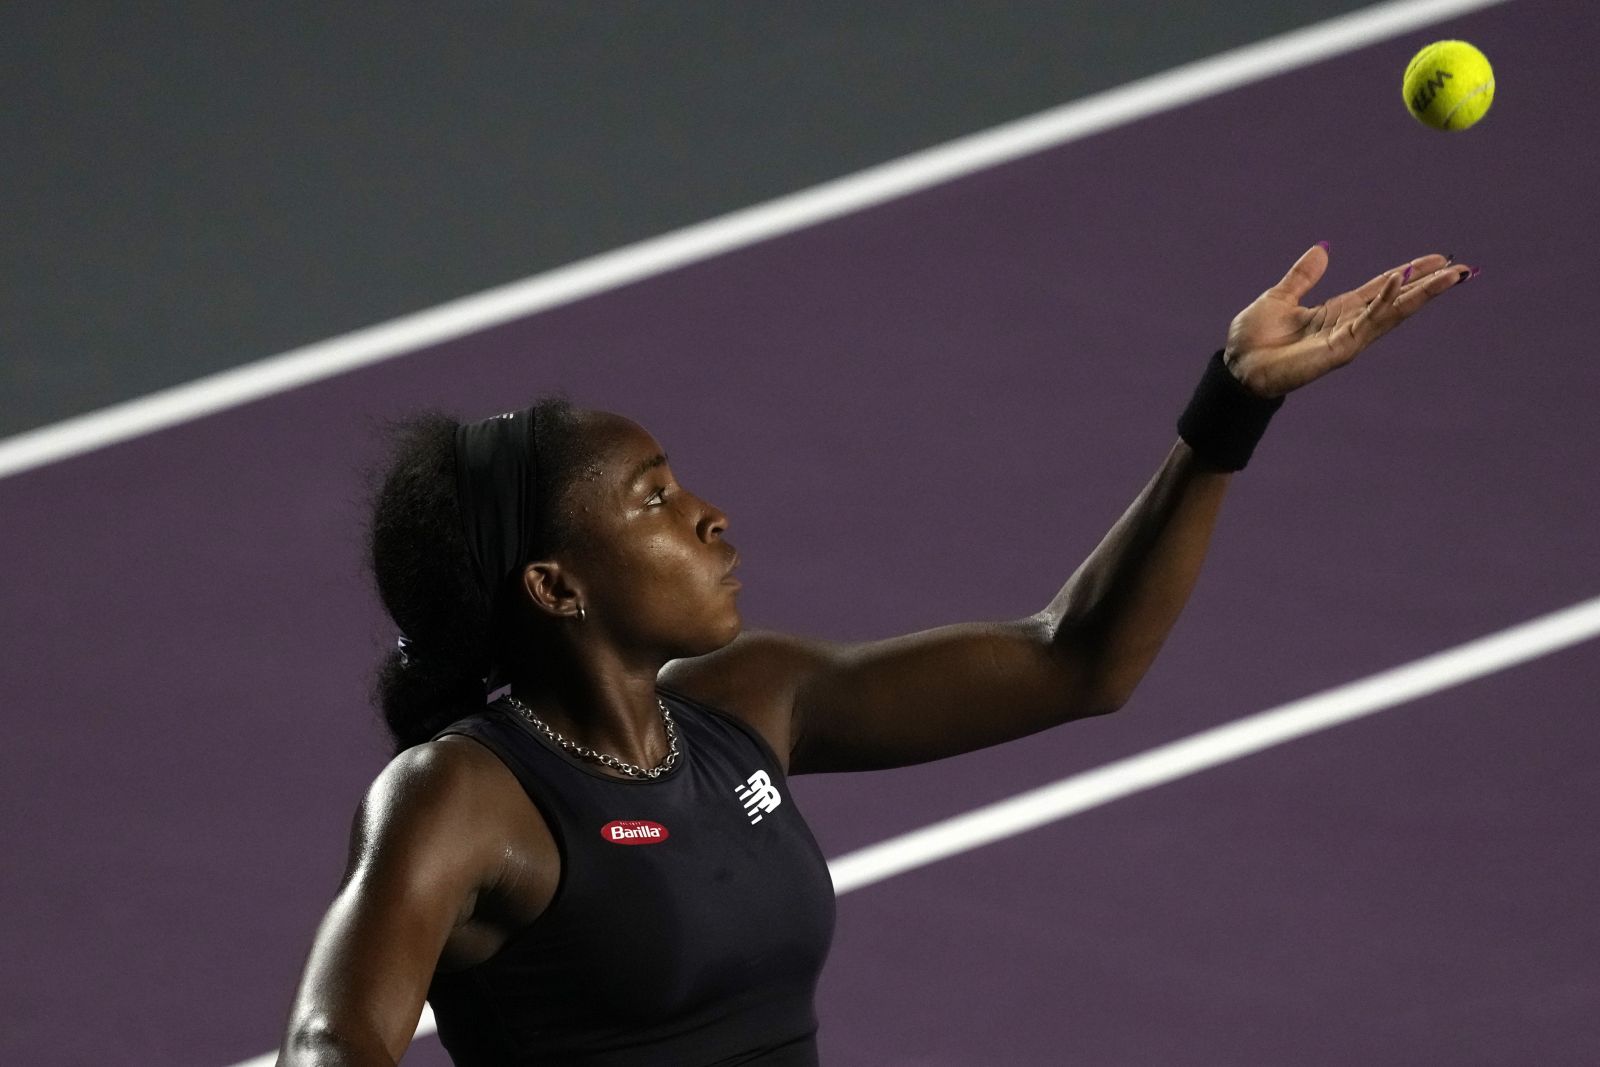 Coco Gauff of the United States serves to Jessica Pegula, of the United States, during a women's singles semifinal match at the WTA Finals tennis championships, in Cancun, Mexico, Saturday, Nov. 4, 2023. (AP Photo/Fernando Llano)